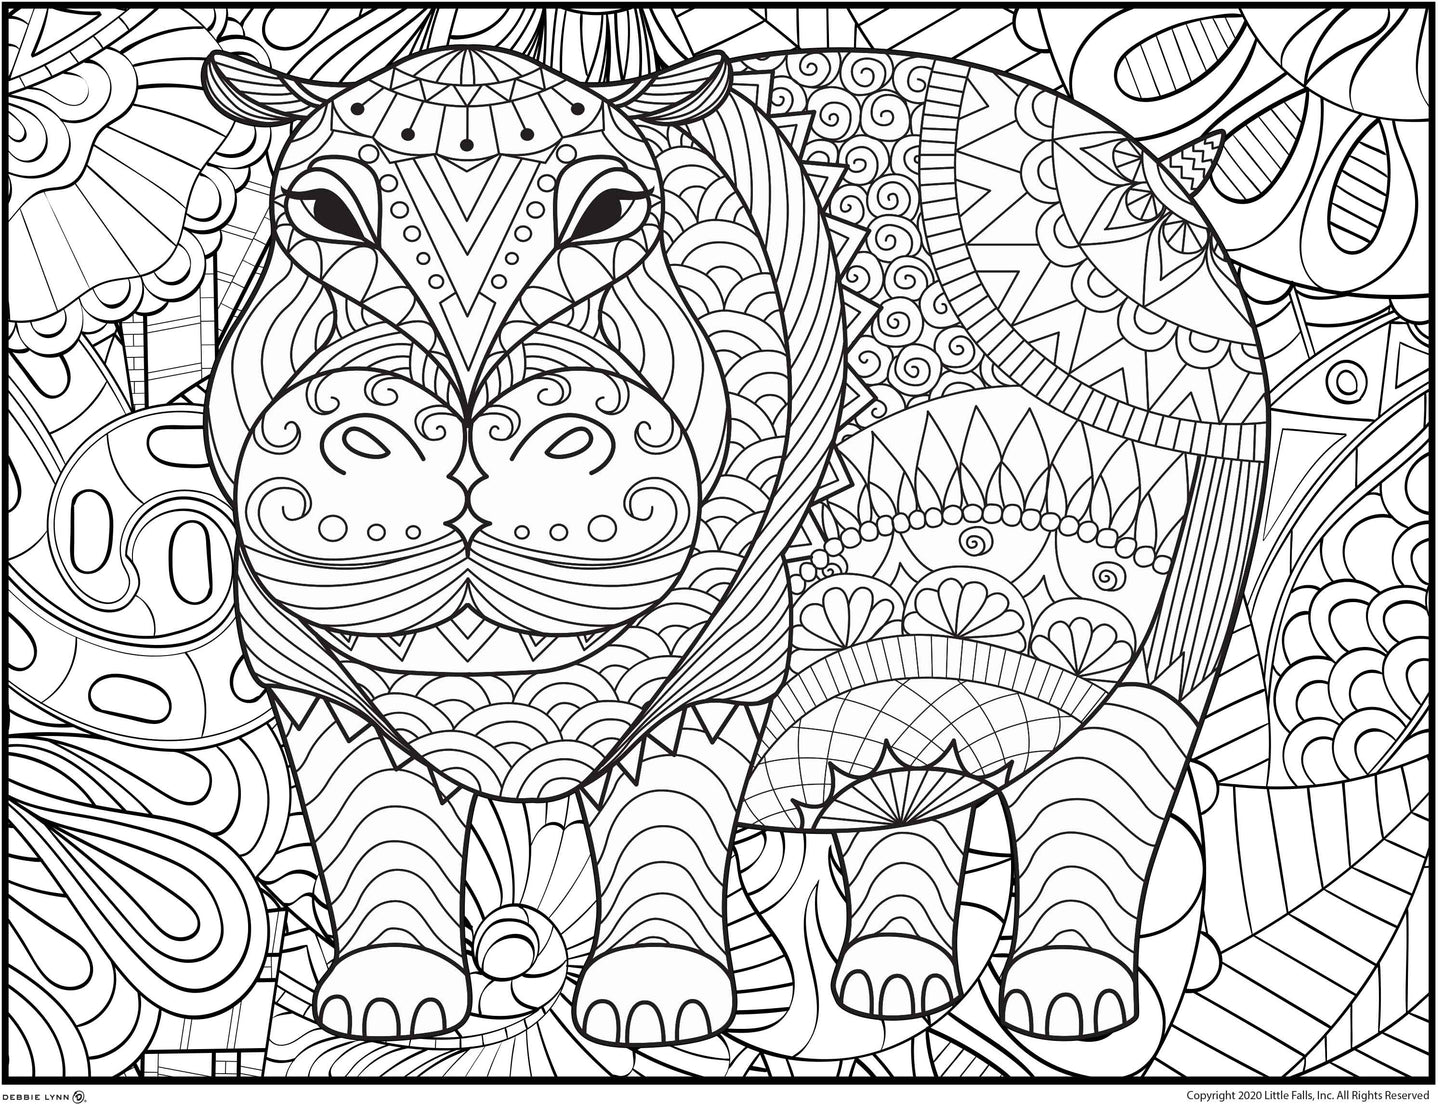 Hippo Personalized Giant Coloring Poster